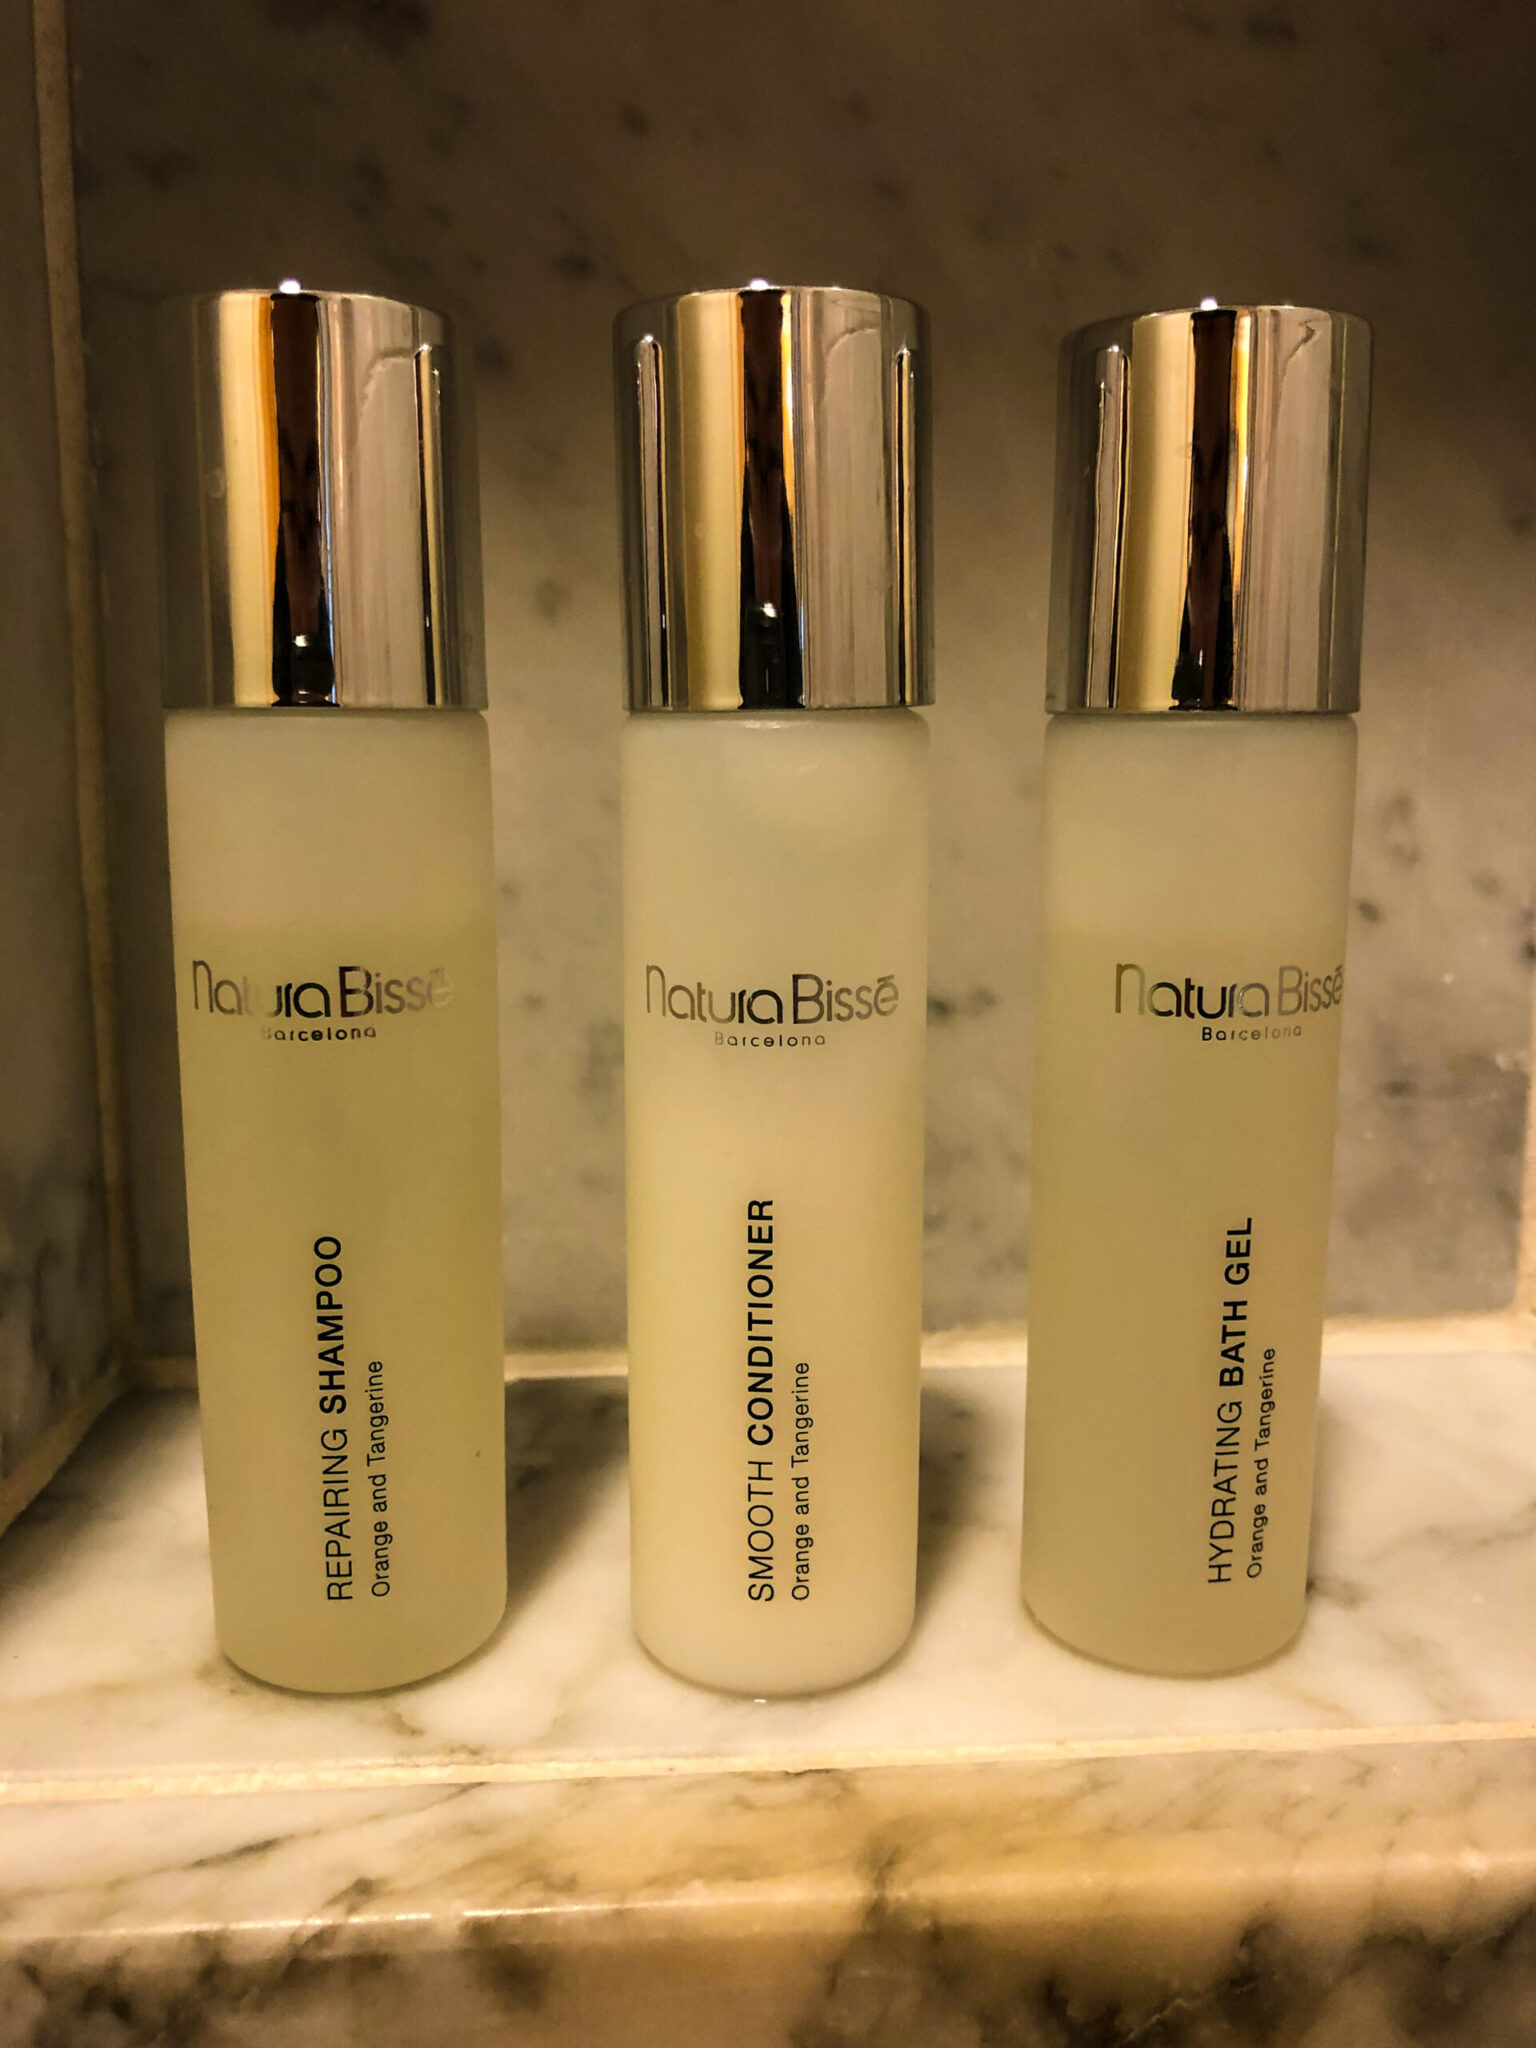 Four Seasons Hotel Westlake Village deluxe king room bath products